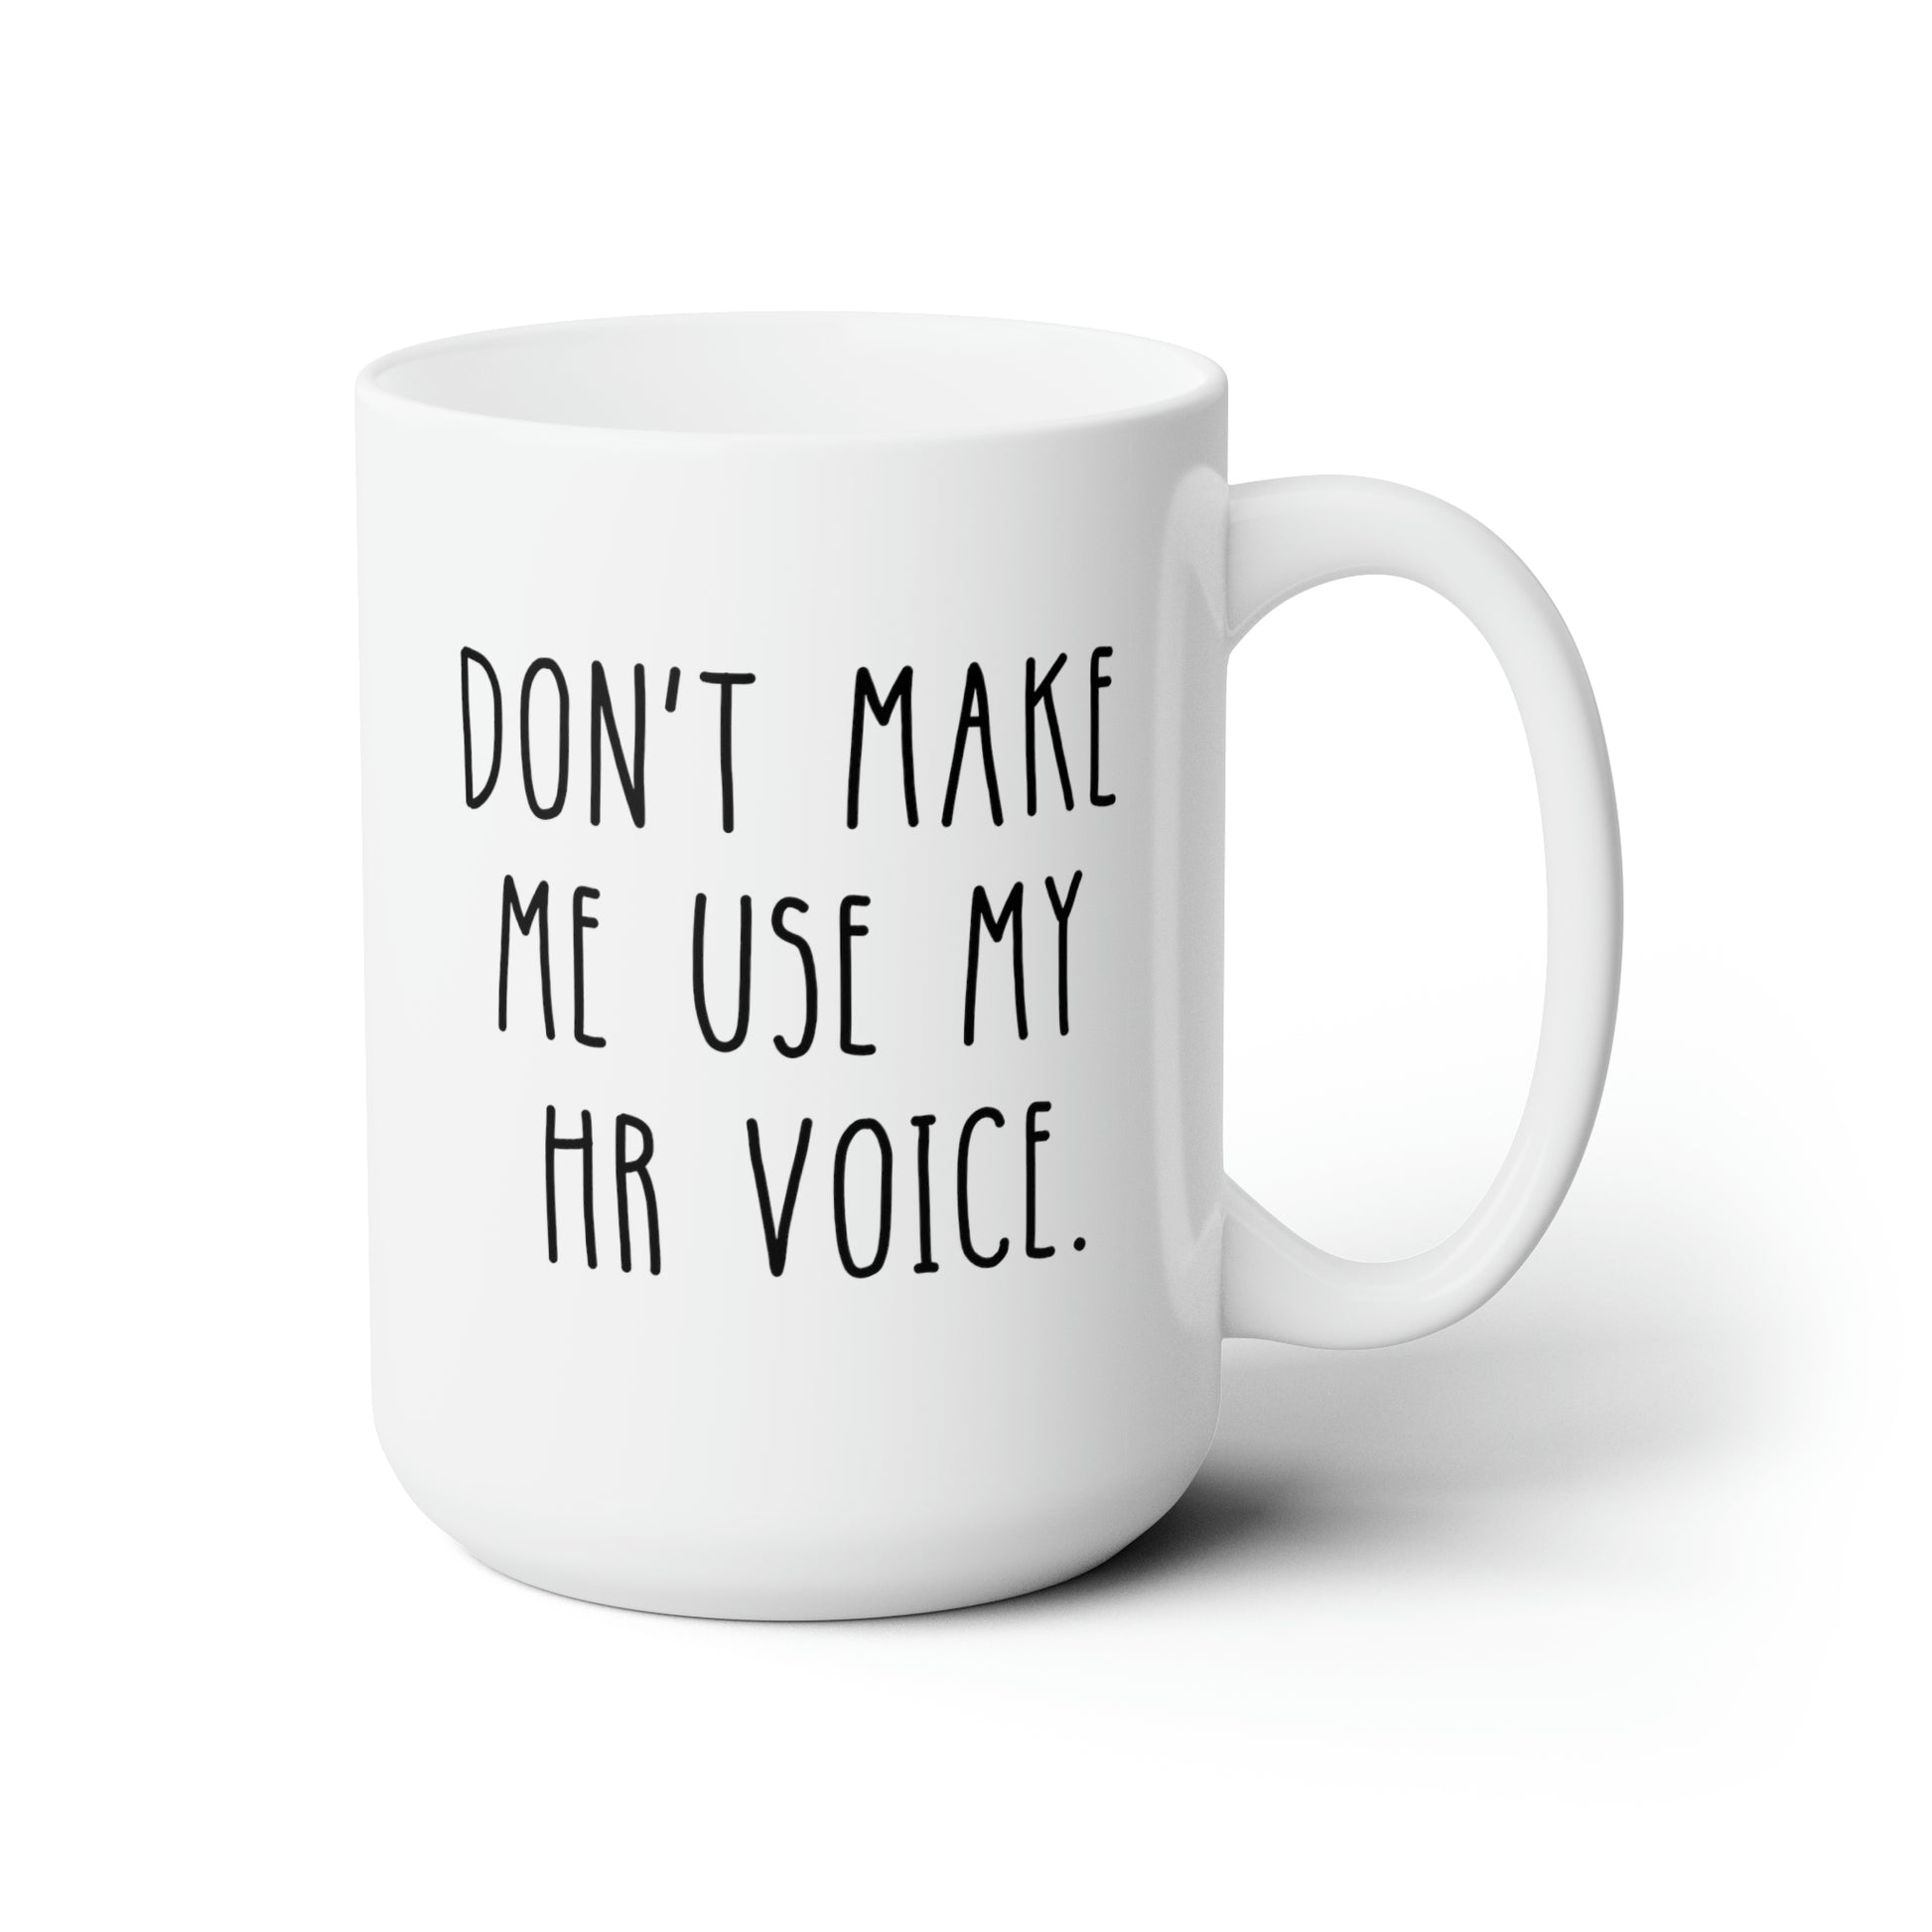 Don't Make Me Use My HR Voice 15oz white funny large coffee mug gift for human resources coworker signs decor quotes waveywares wavey wares wavywares wavy wares